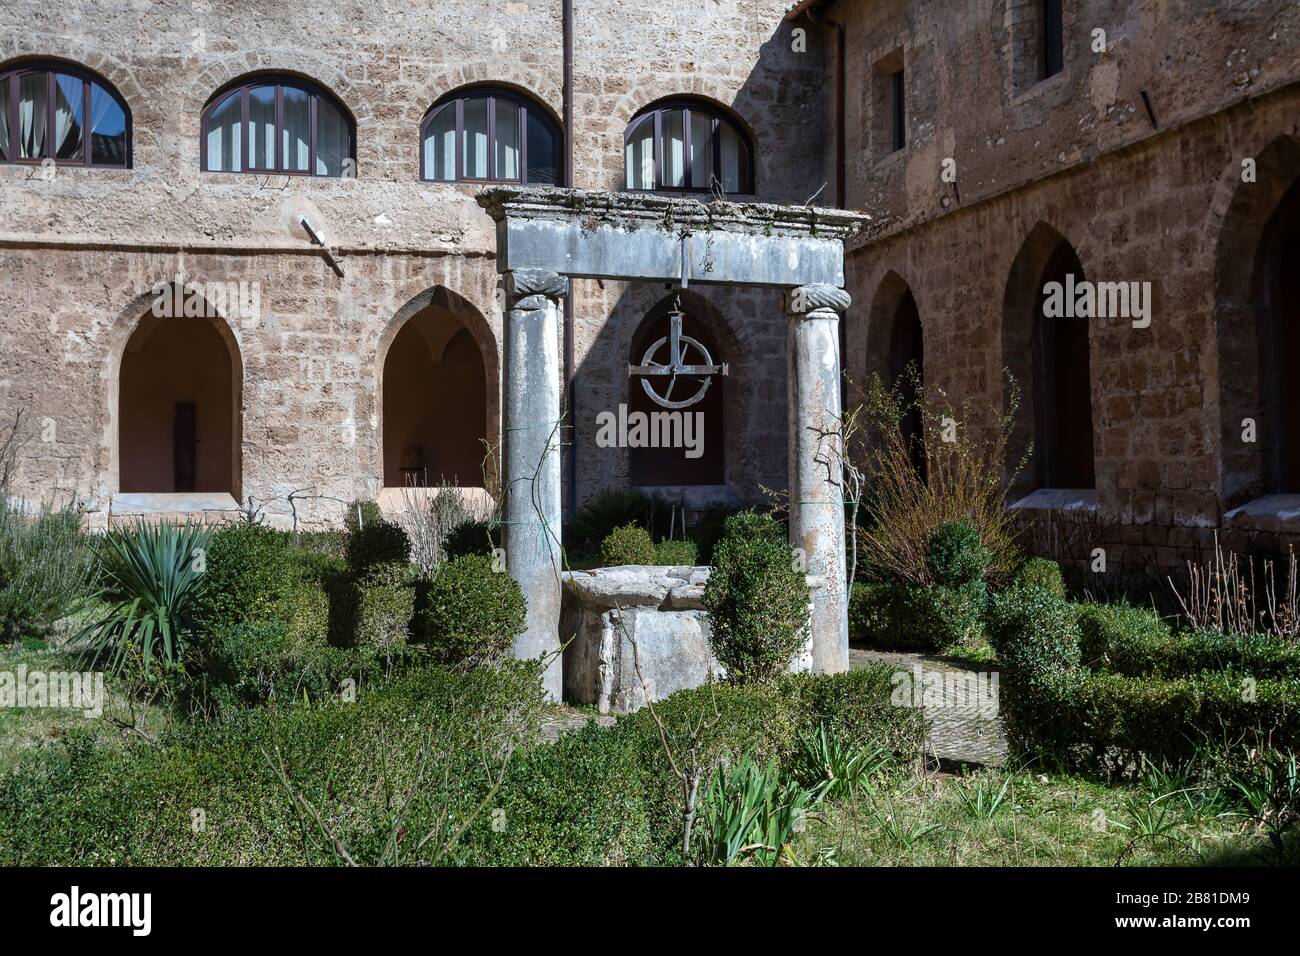 Subiaco, Italy - February 23, 2020: Monastery of Santa Scolastica - the ancient well from inside the cloister. Stock Photo